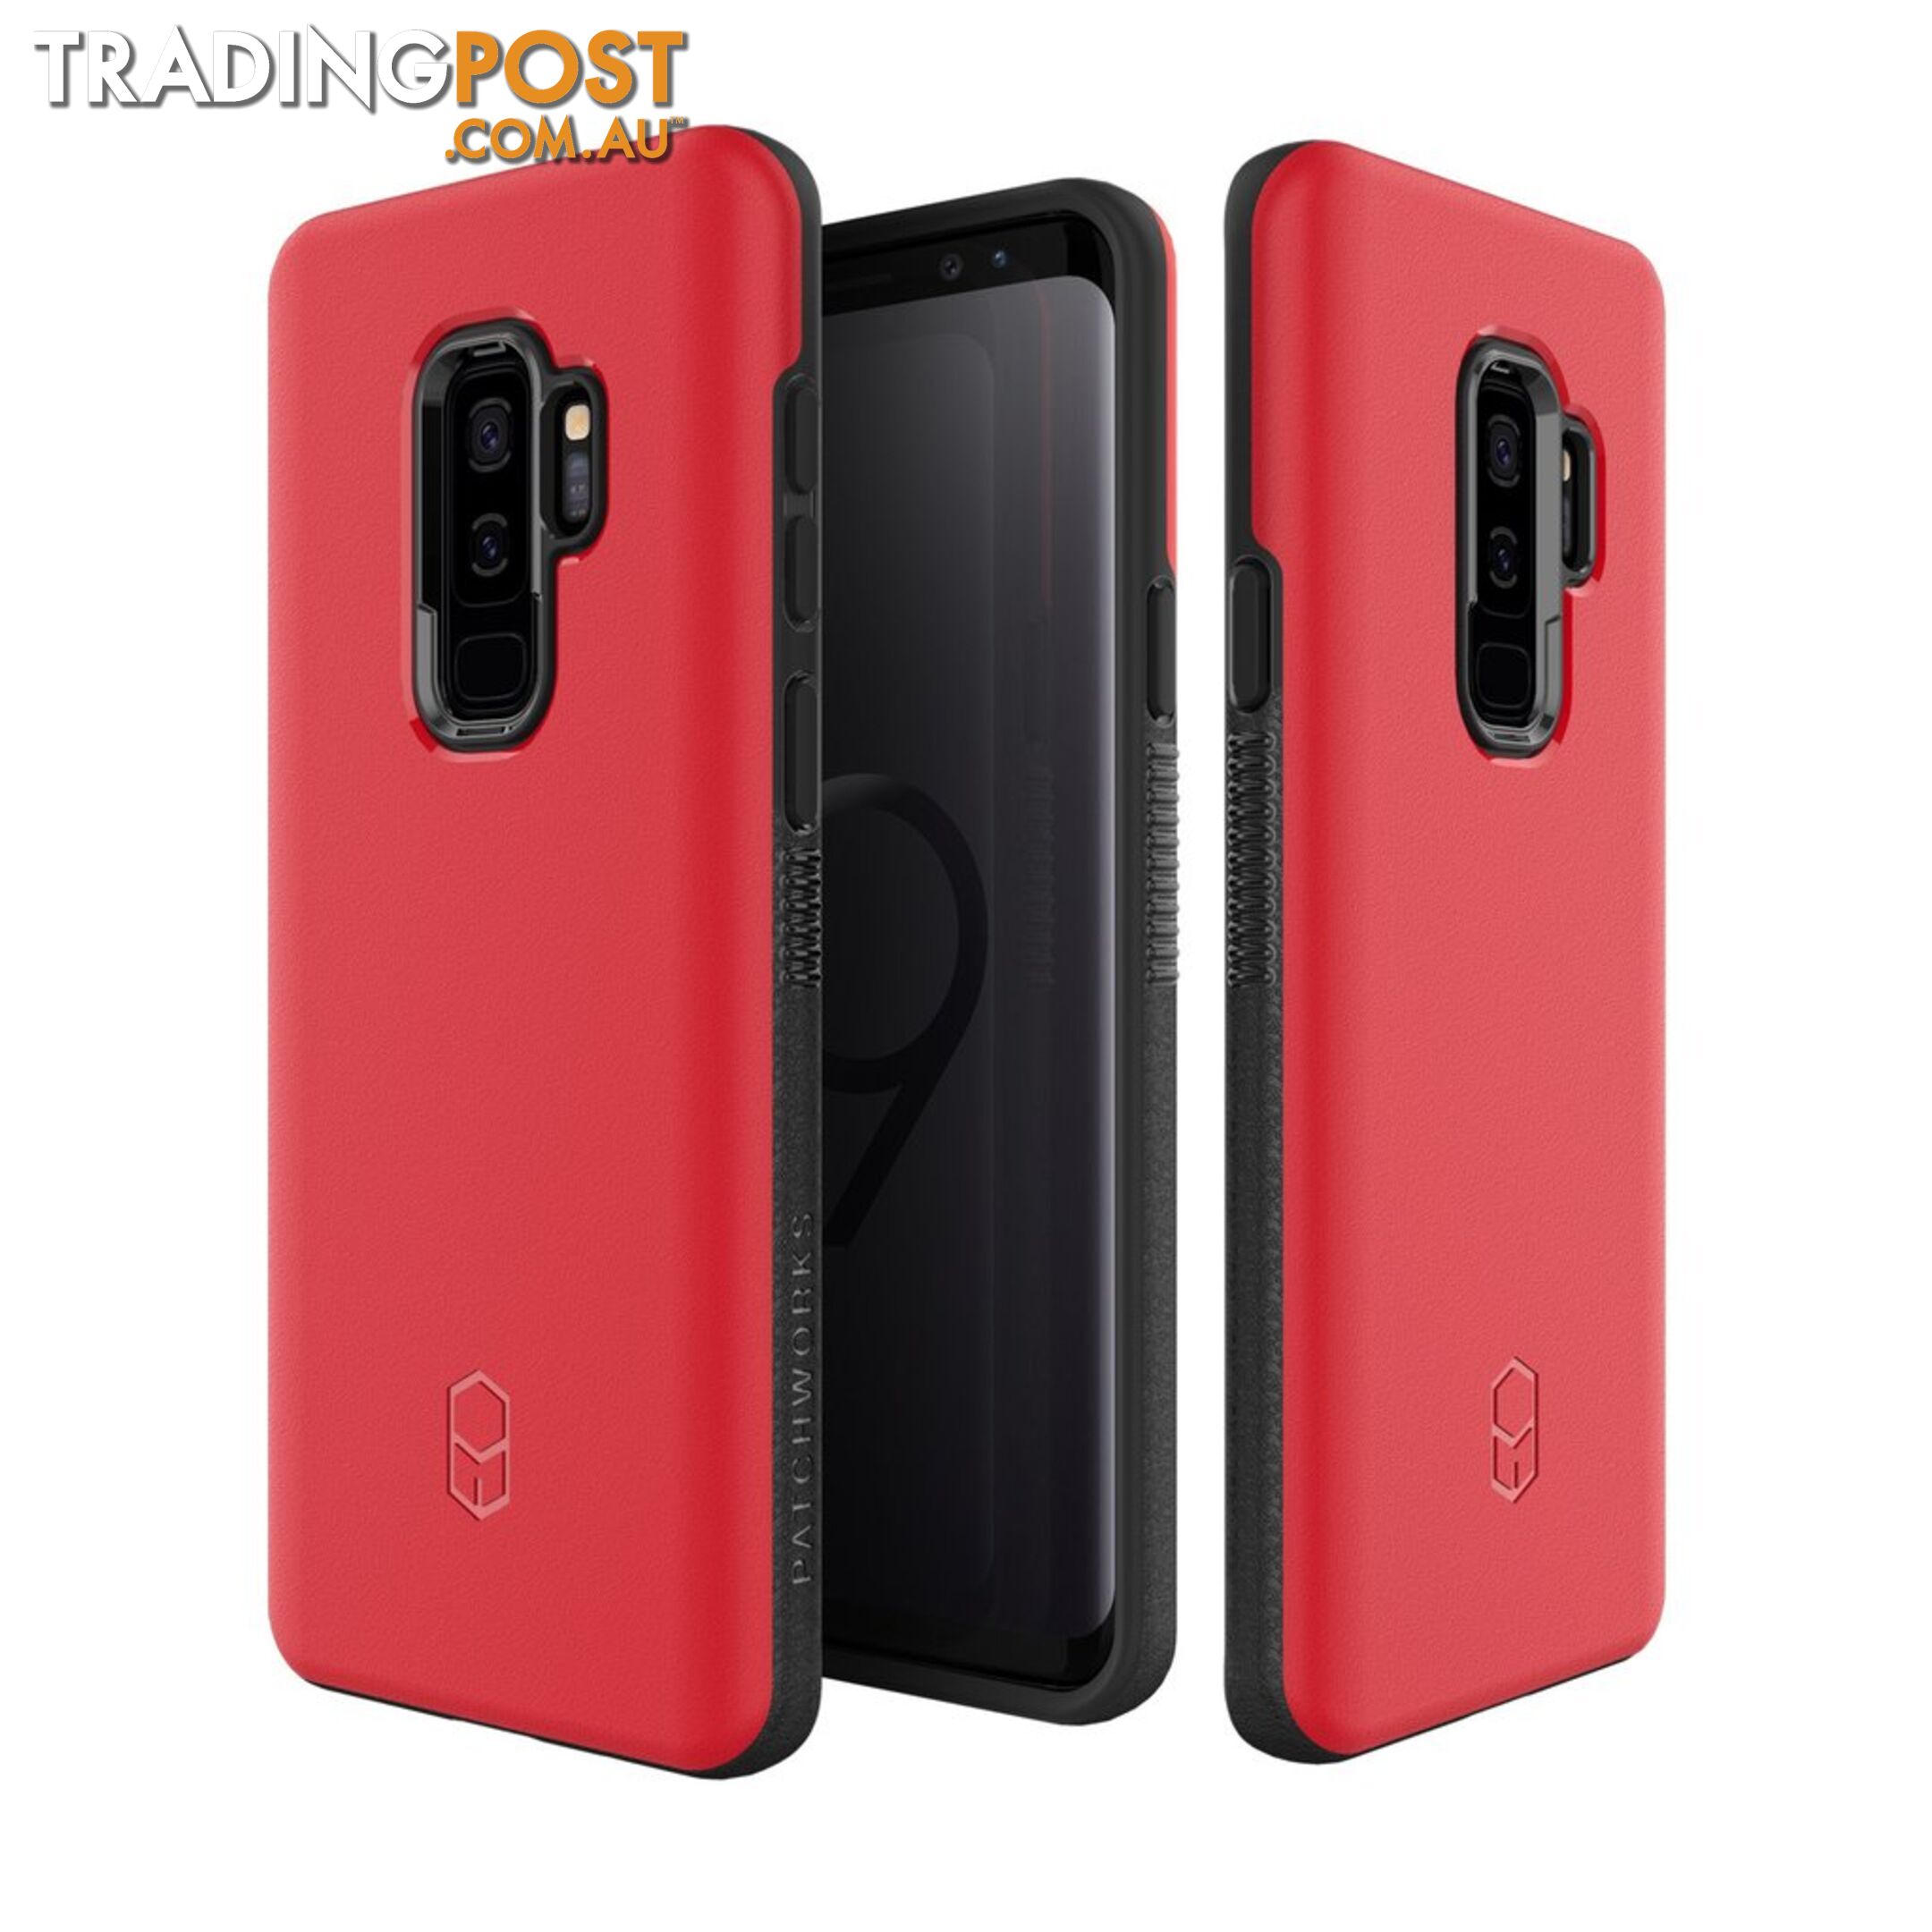 Patchworks ITG Level Rugged Case for Samsung Galaxy S9 Plus - Red - 8809597090126/LIS94 - Patchworks